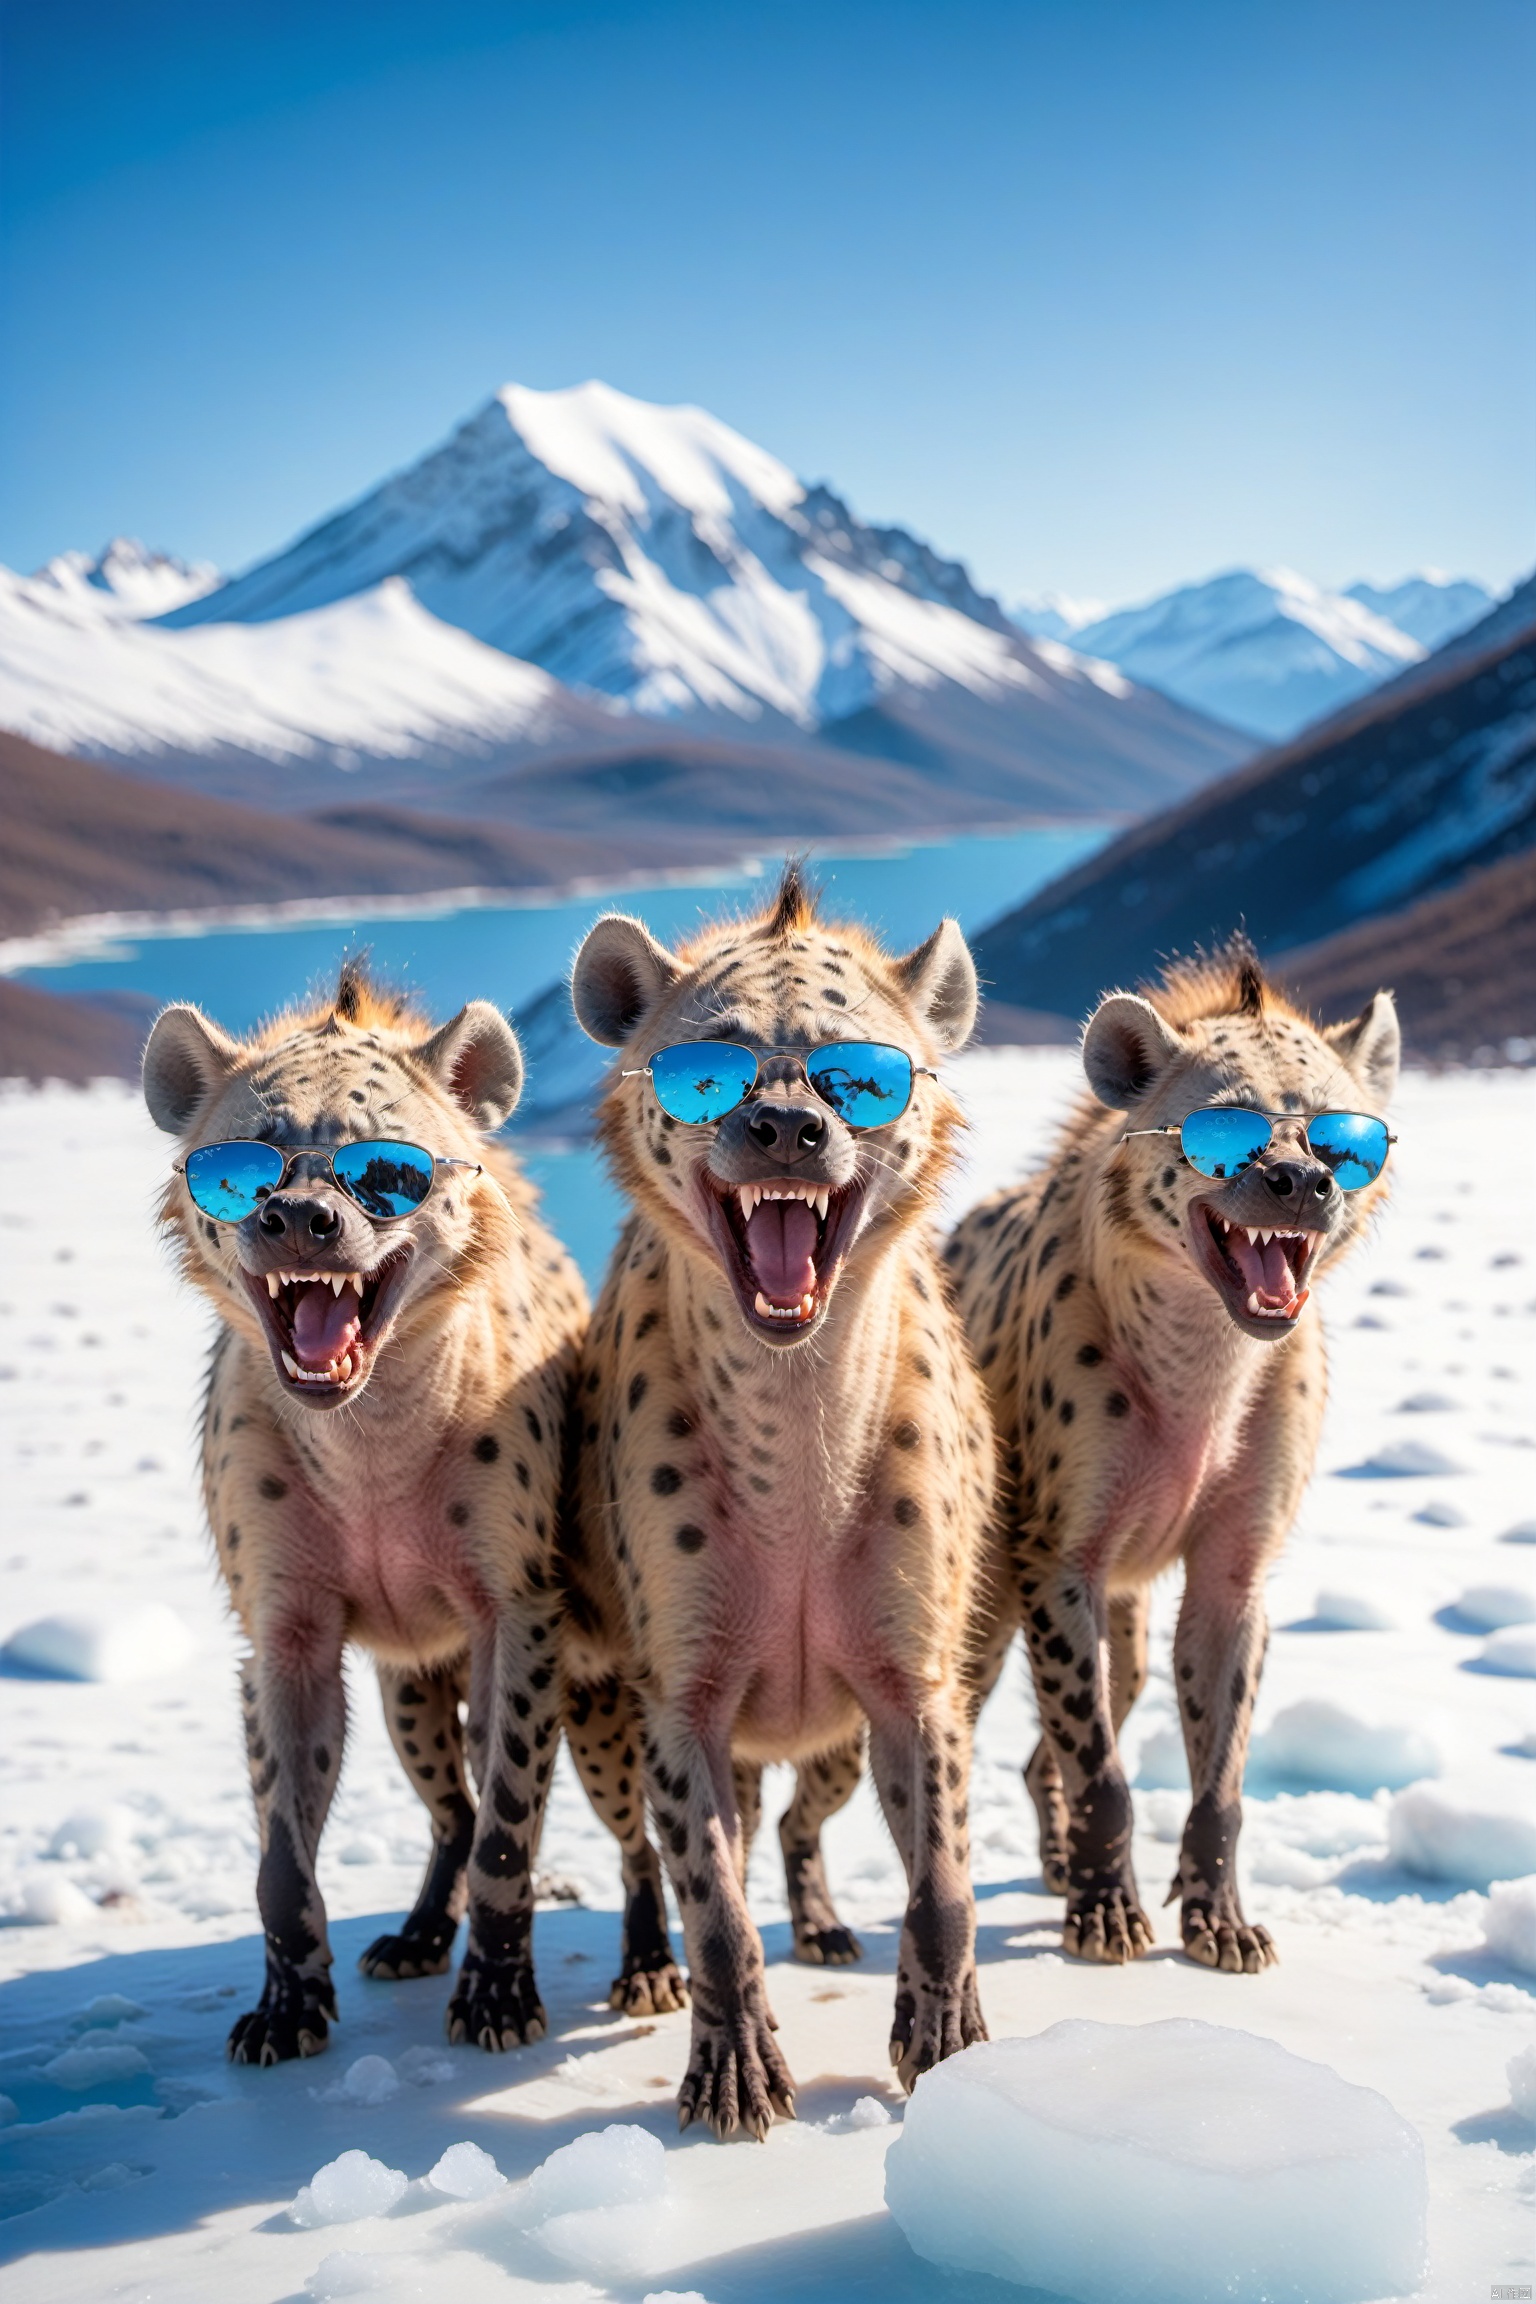  A pack of hyenas in stylish sunglasses, surprised, cute, laughing, outdoors, sky, day, blue sky, no humans, scenery, snow, reflection, ice, mountain, motion blur, lake, frozen